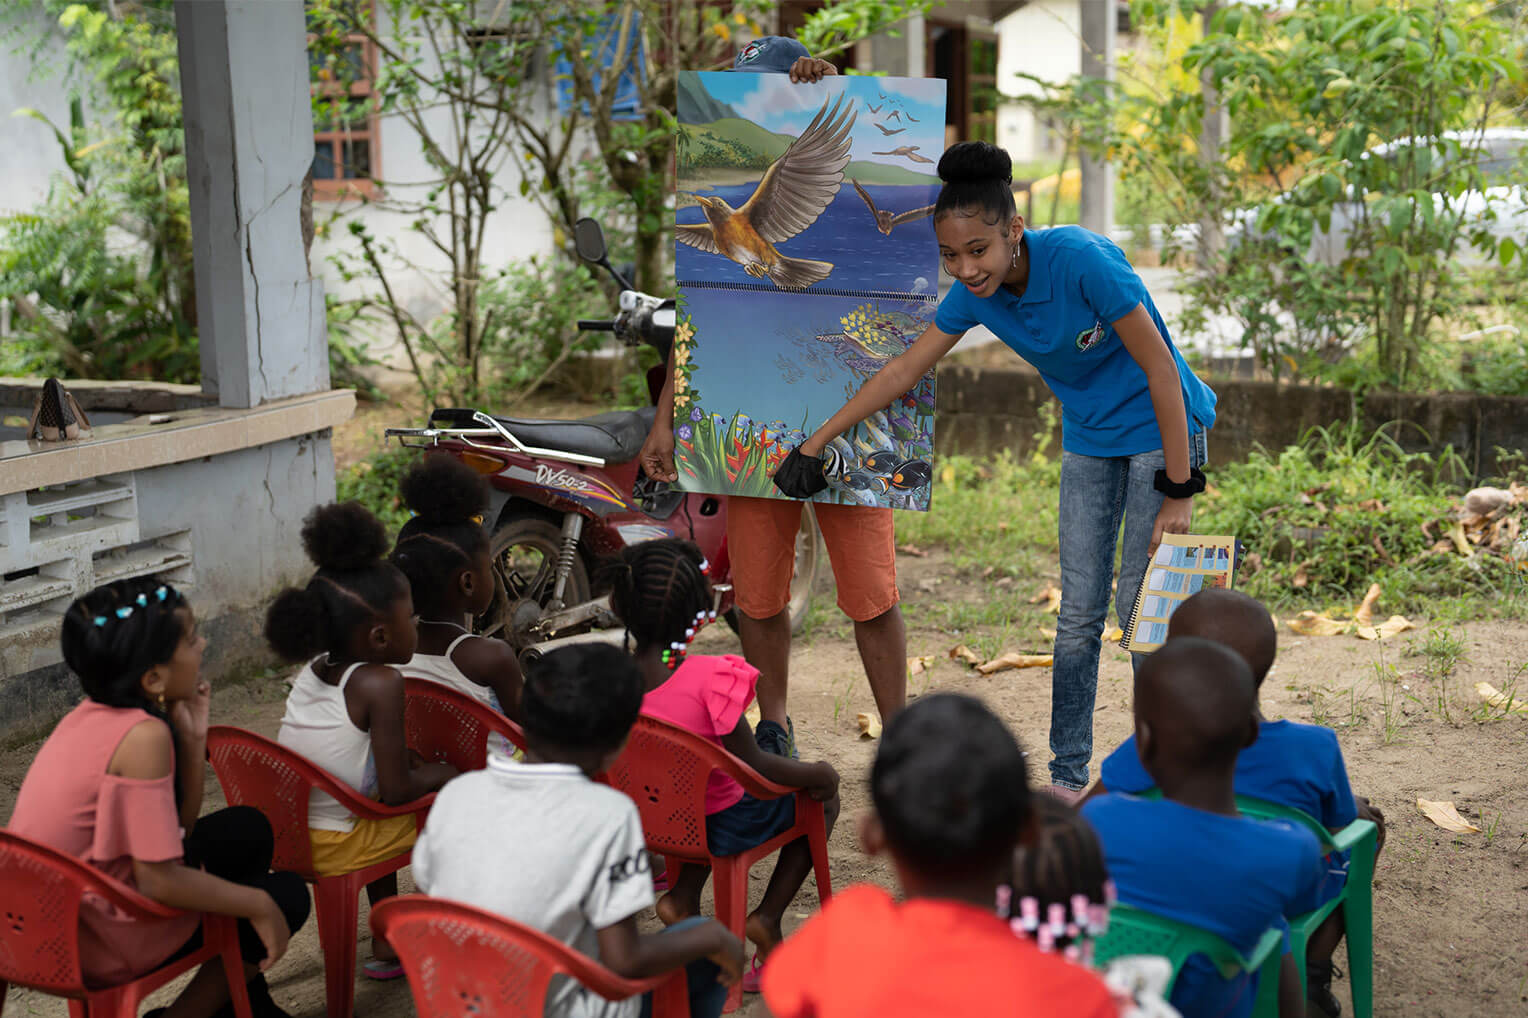 Charahja teaches children at an Operation Christmas Child outreach event in Suriname.